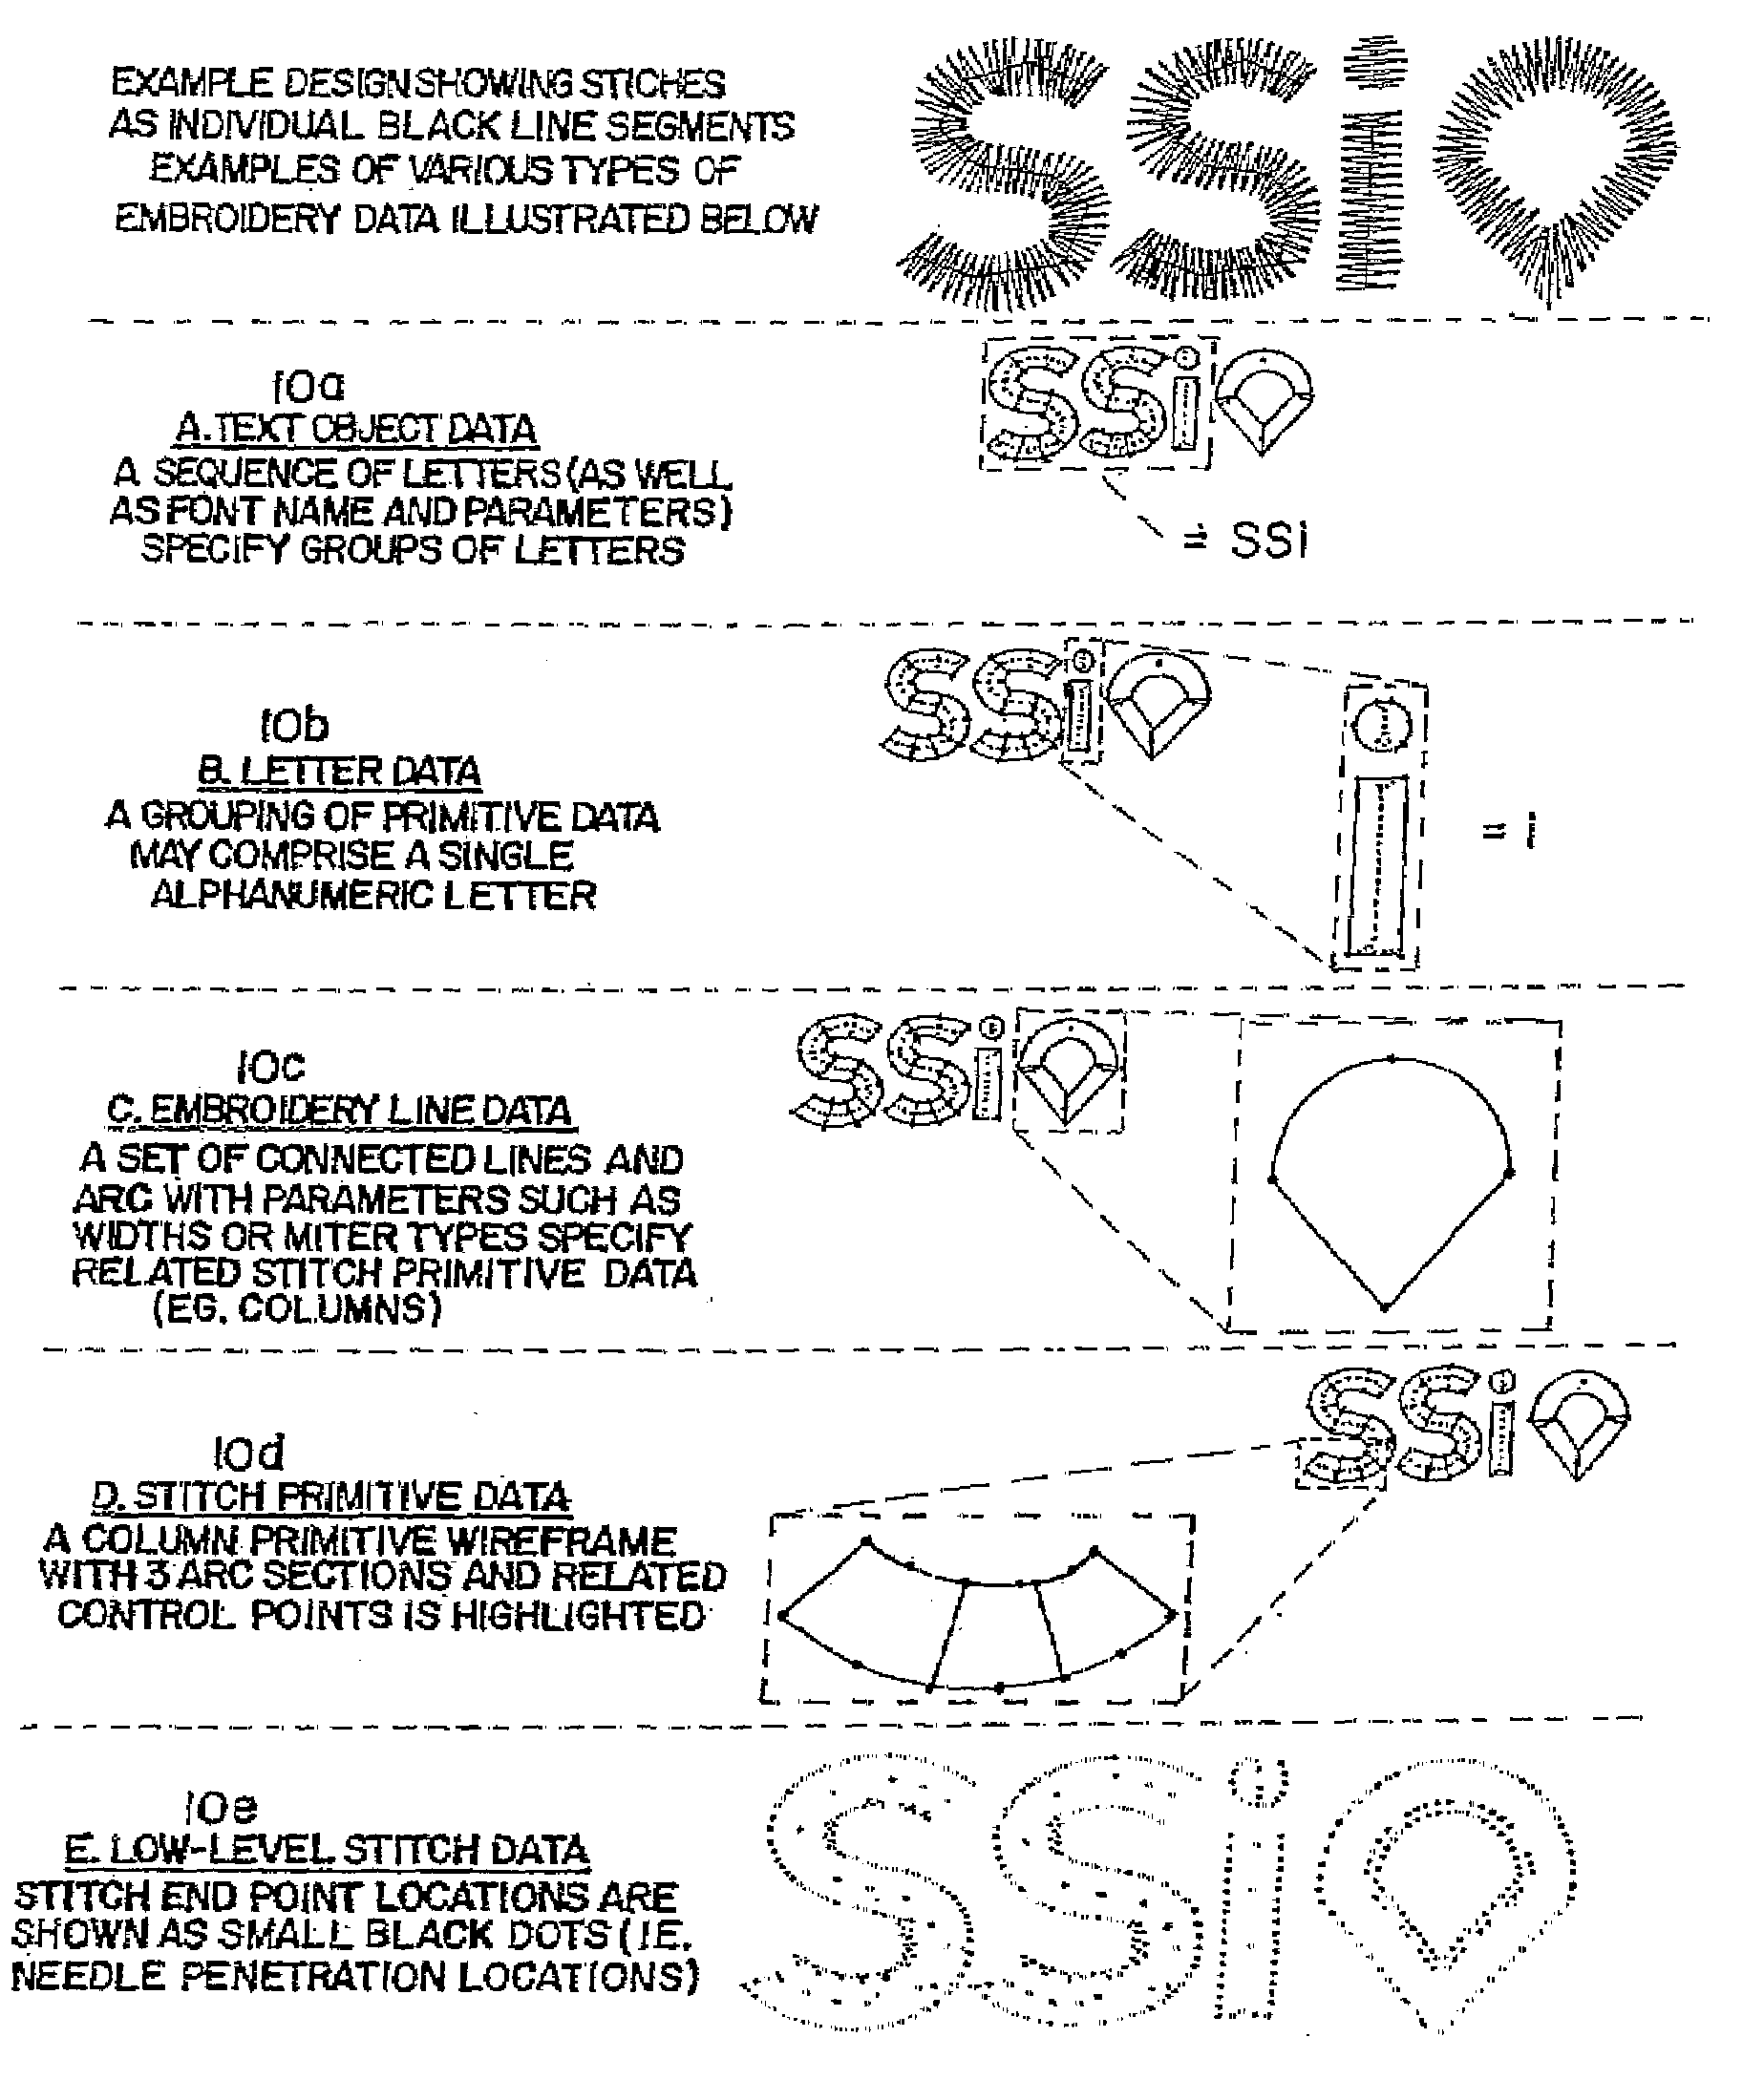 Method and System for Creating and Manipulating Embroidery Designs Over a Wide Area Network